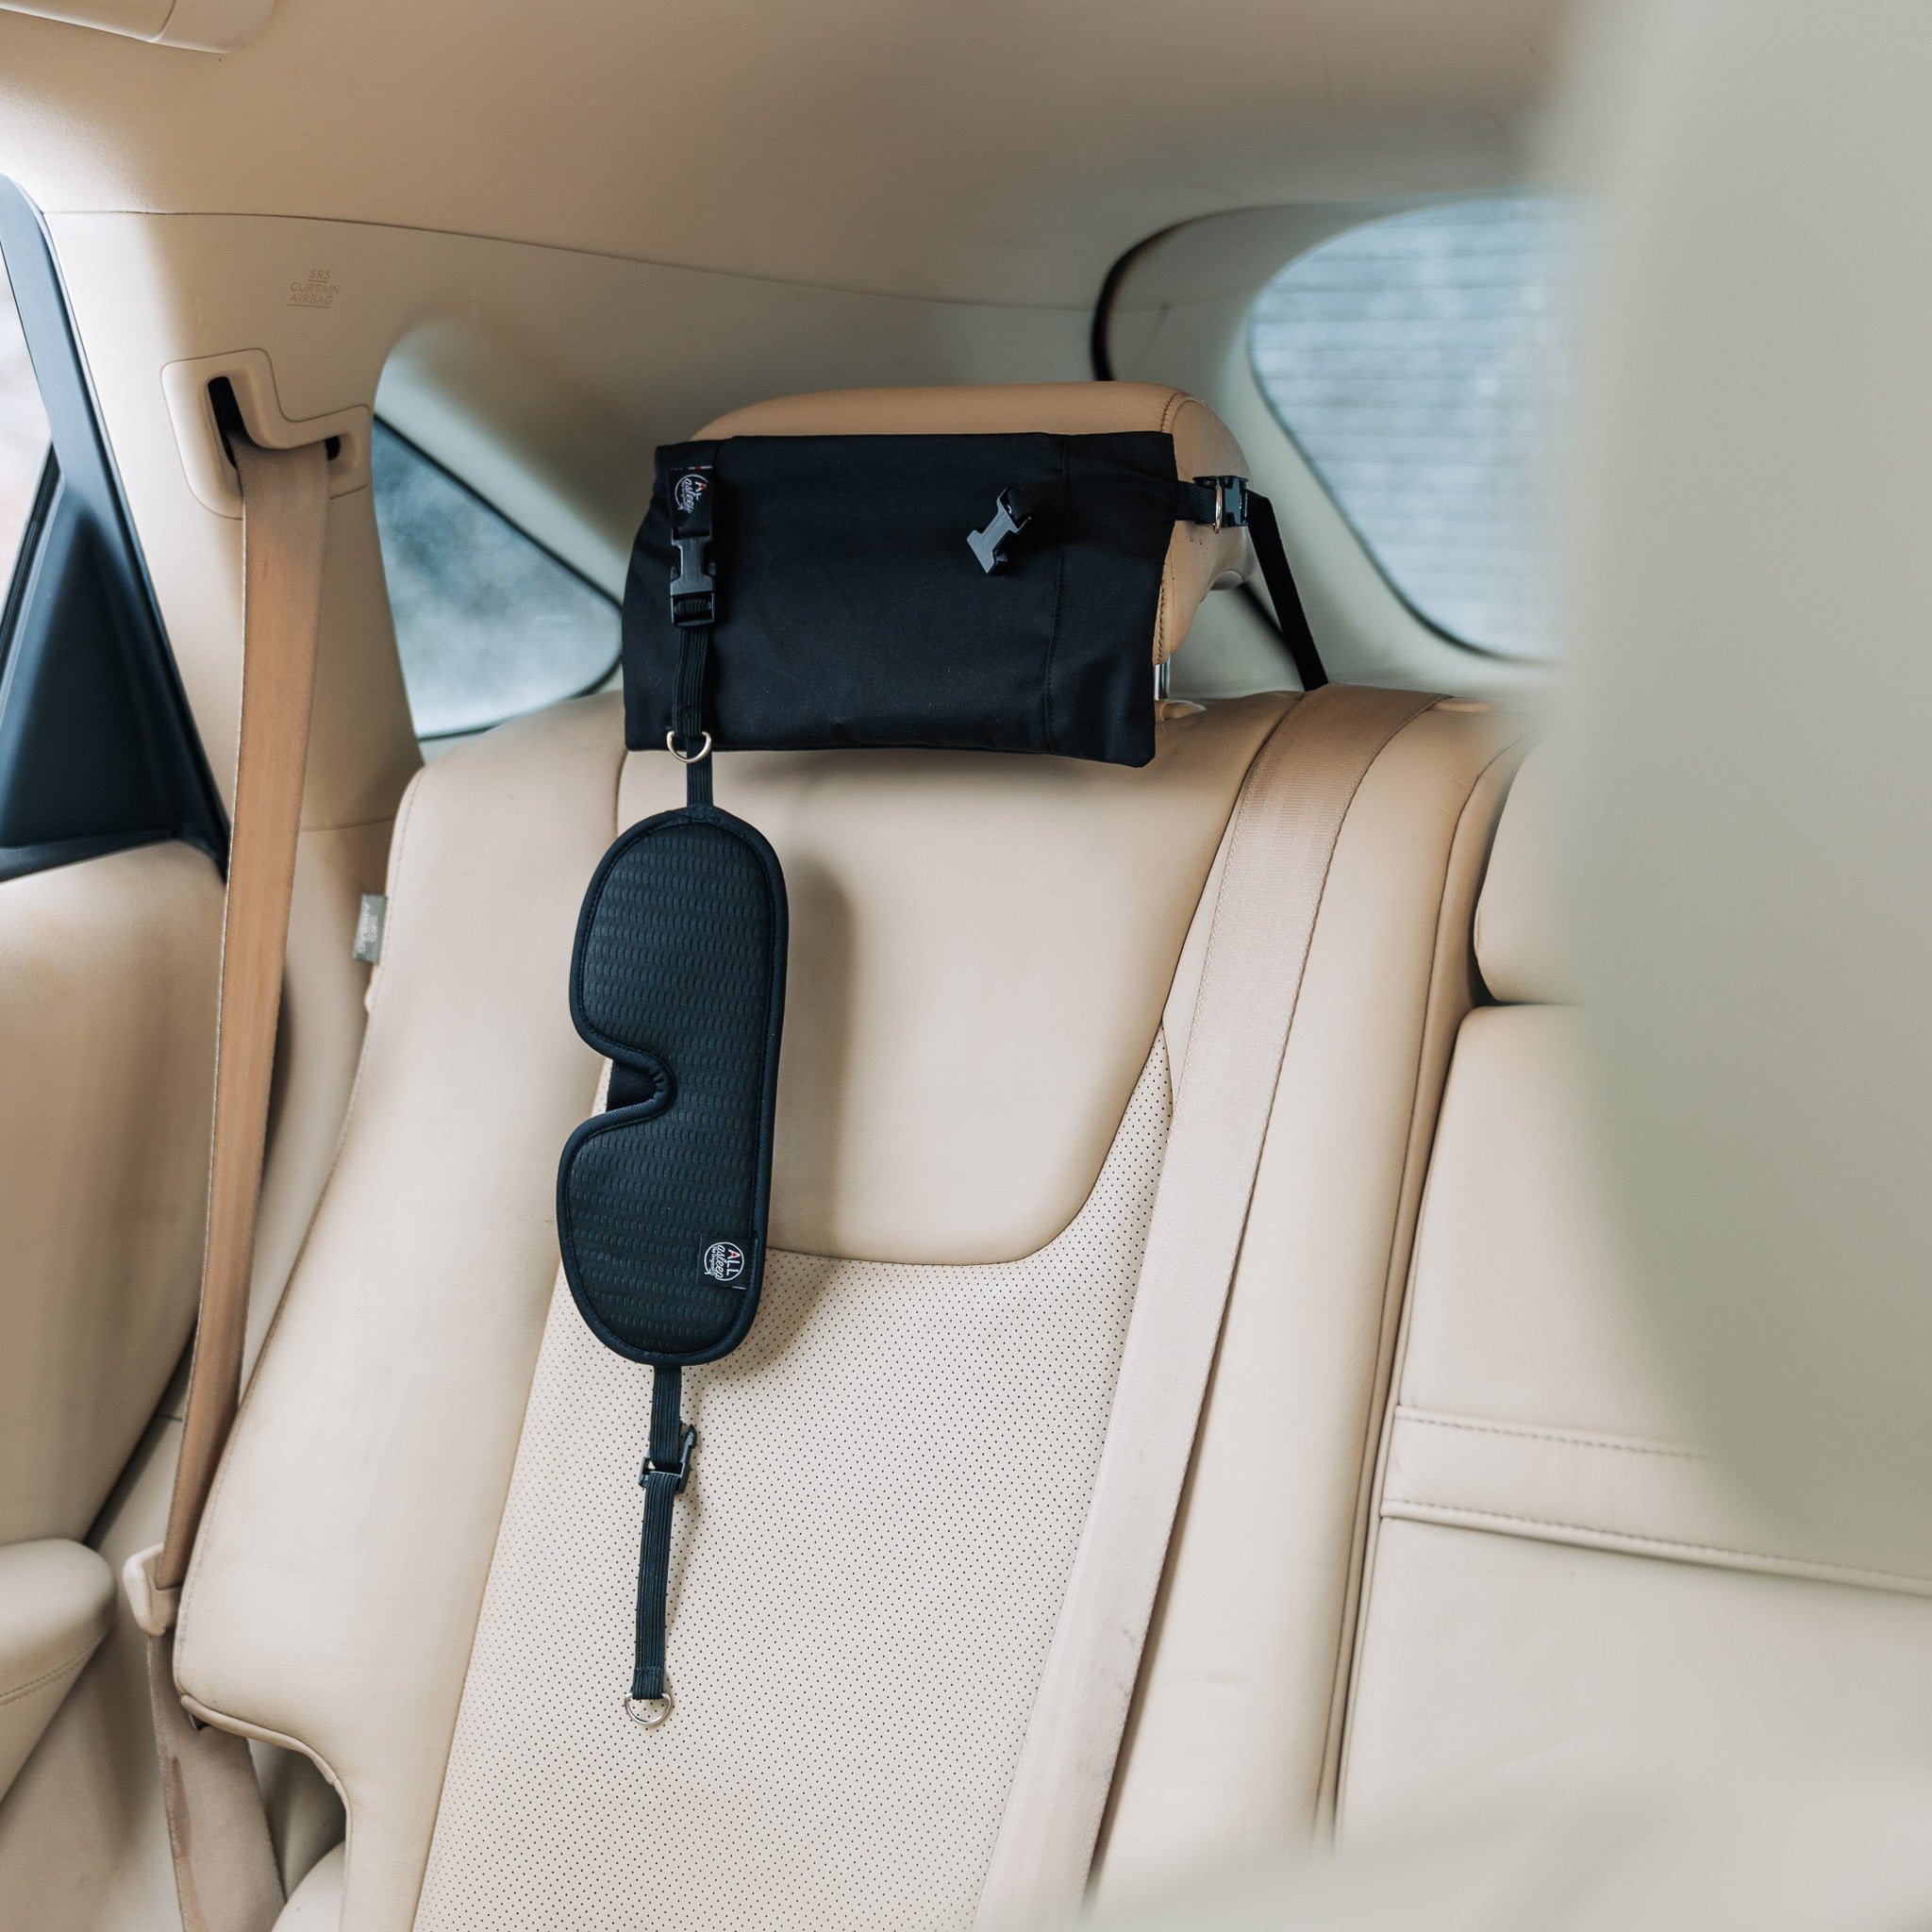 product view of the ALLasleep travel accessory installed on the back seat of a car